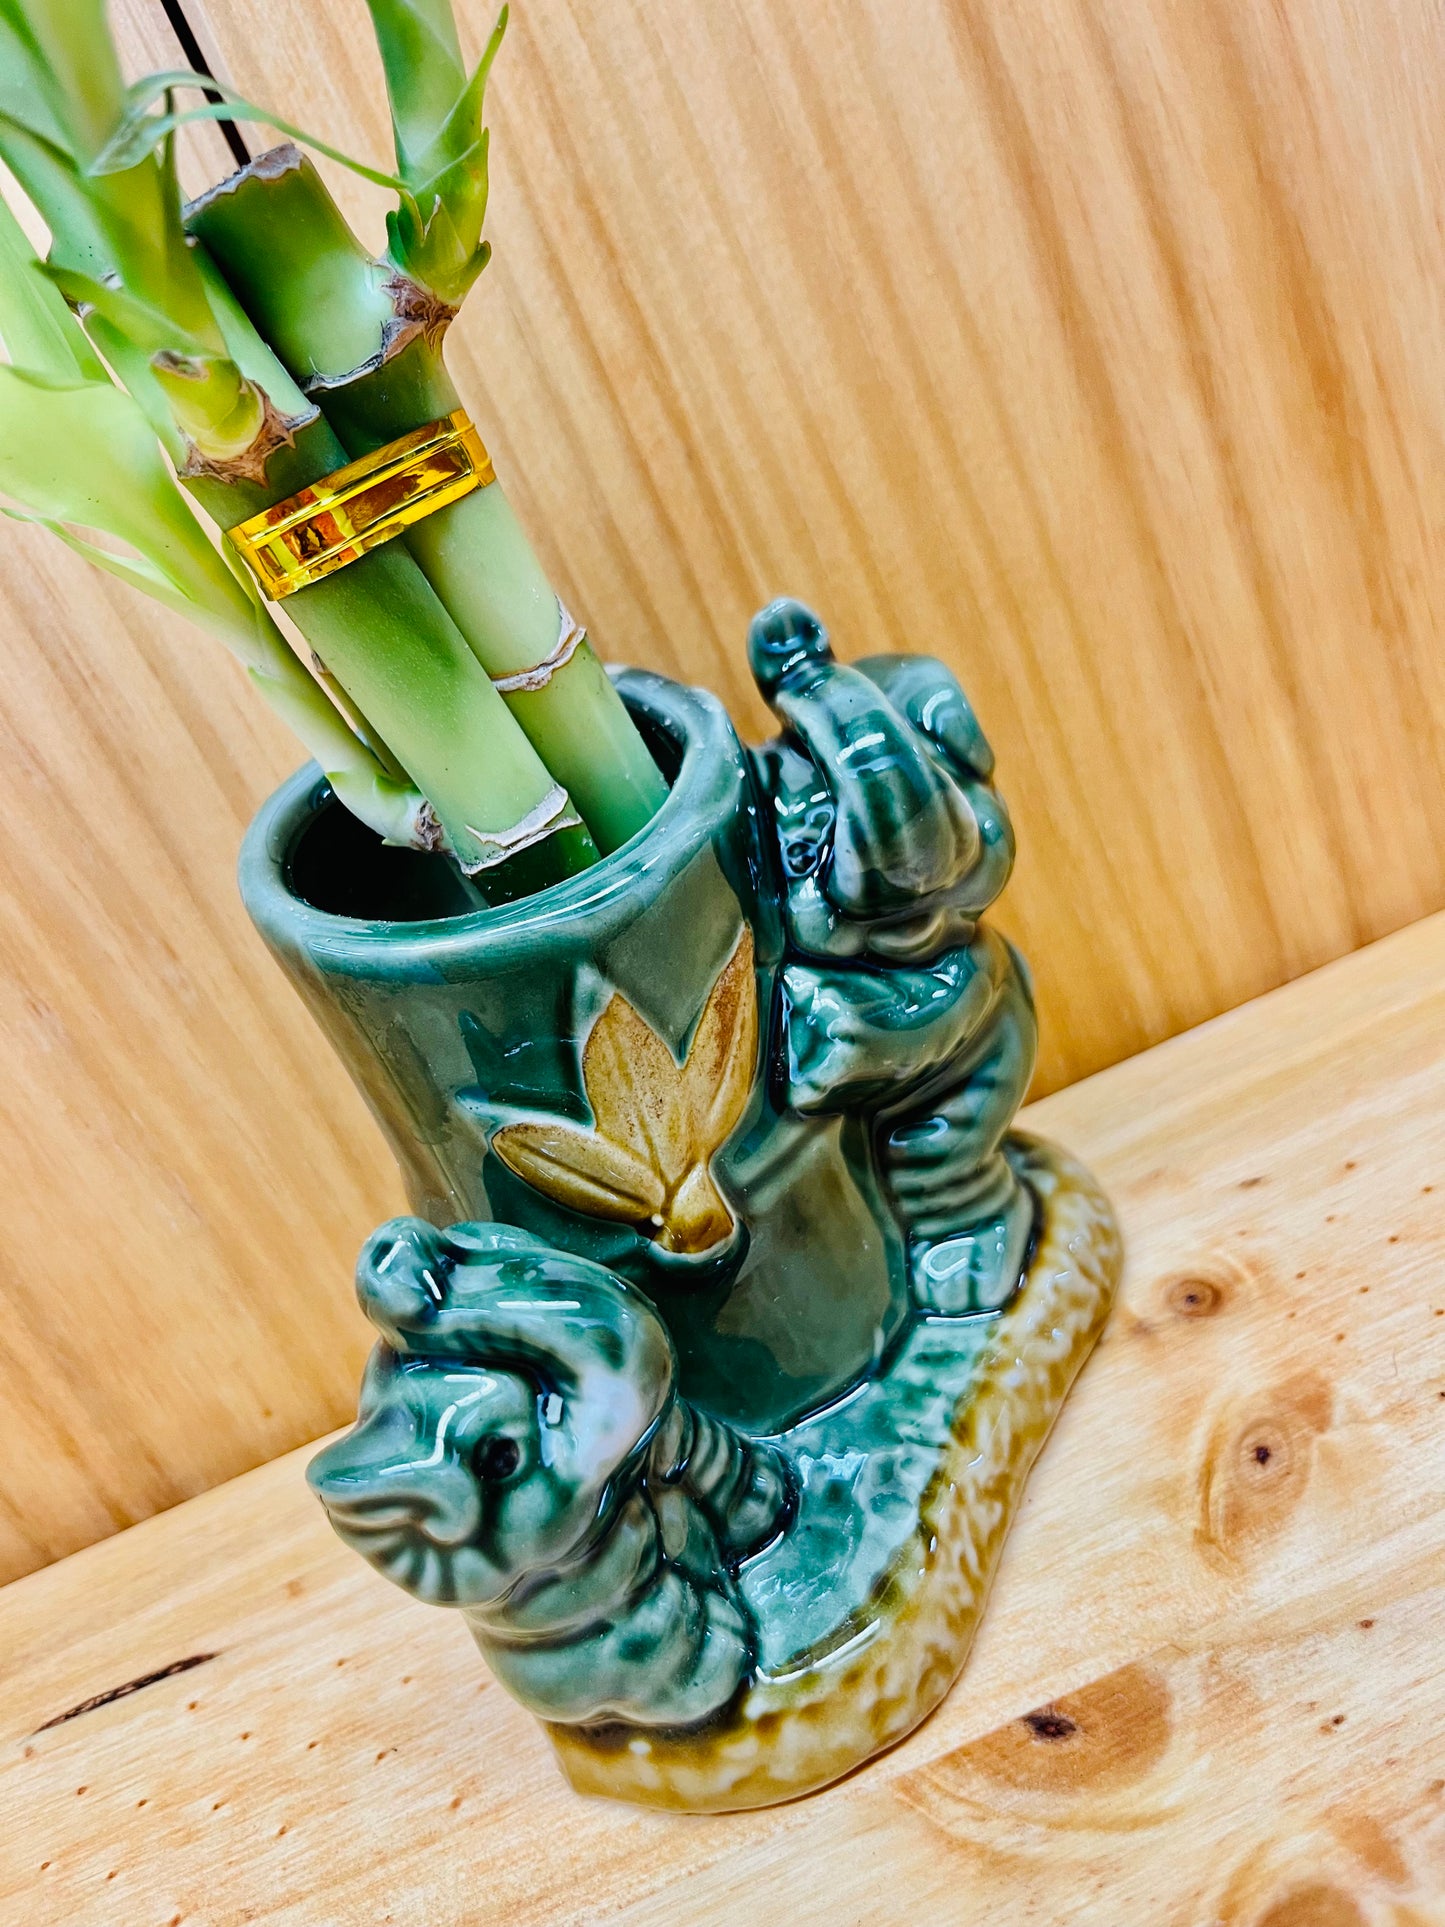 Lucky Bamboo in Ceramic Tall Elephant Vase 3 Stem 6”6”8” Bamboo includes River Pebble Rocks